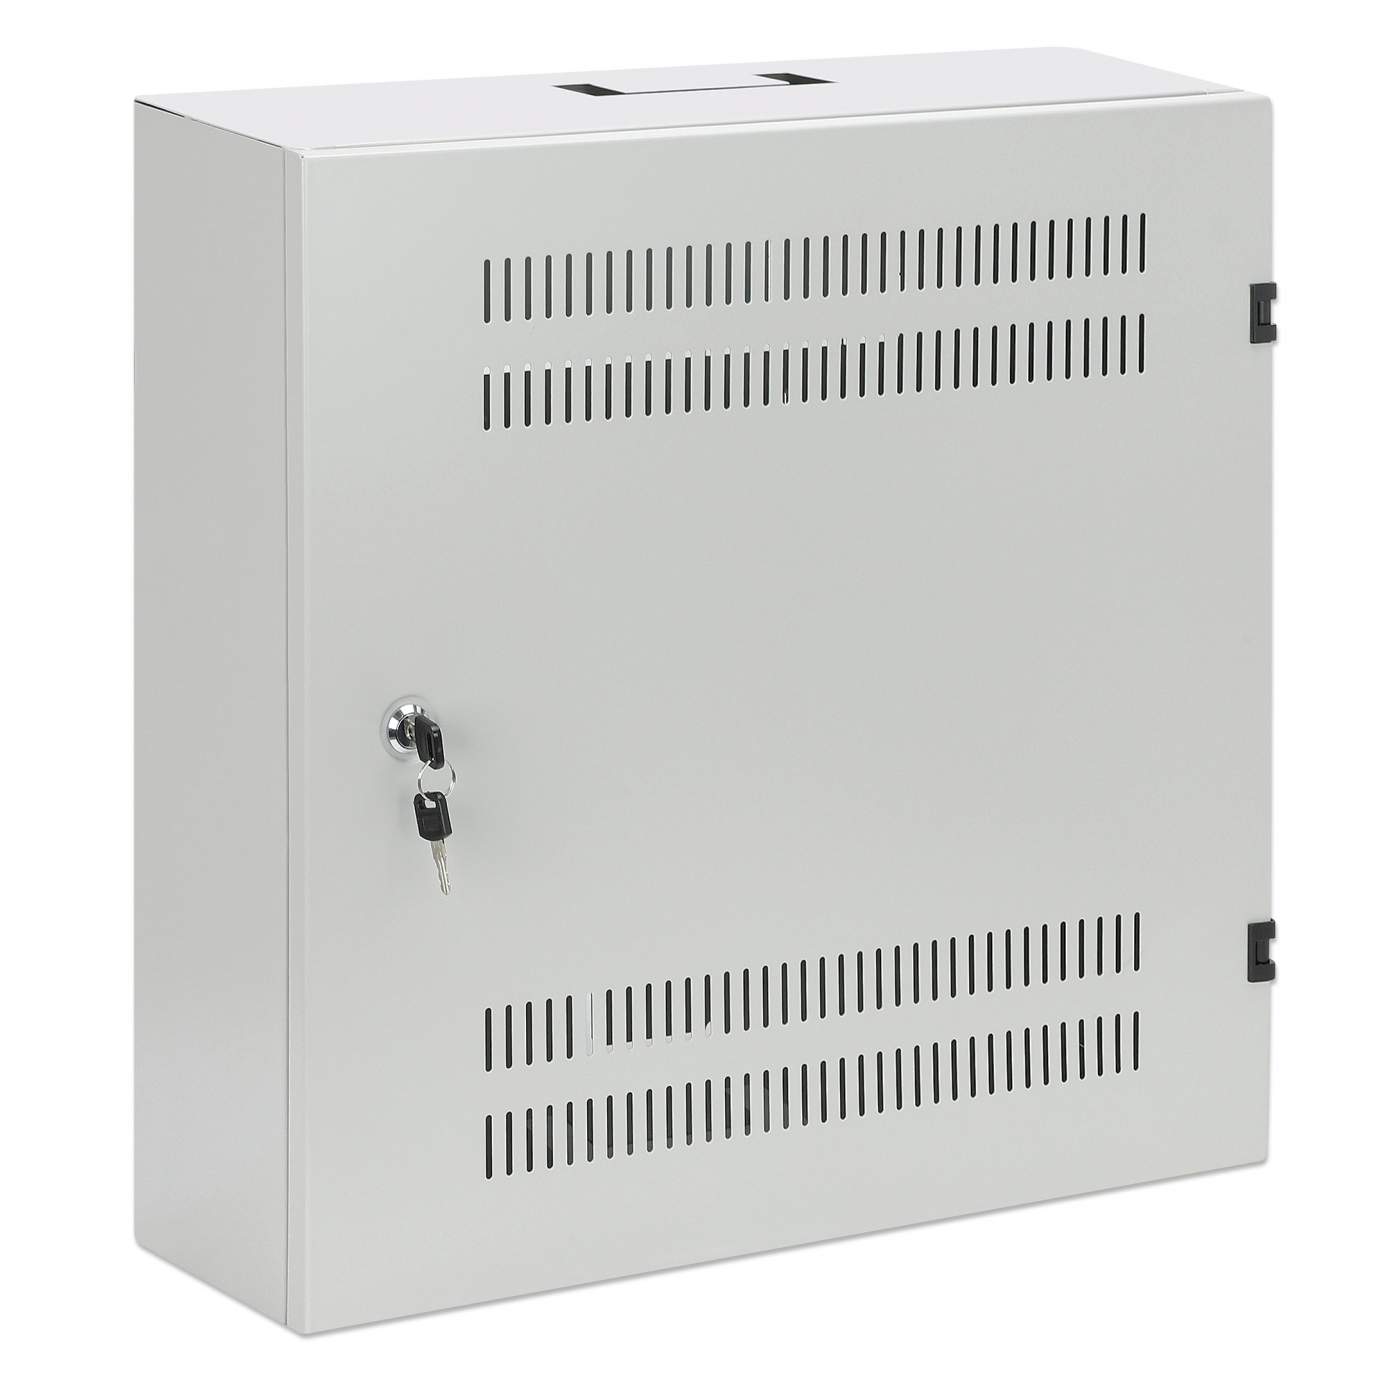 Low-Profile 19" Wall Mount Cabinet with 4U Horizontal and 2U Vertical Rails Image 2